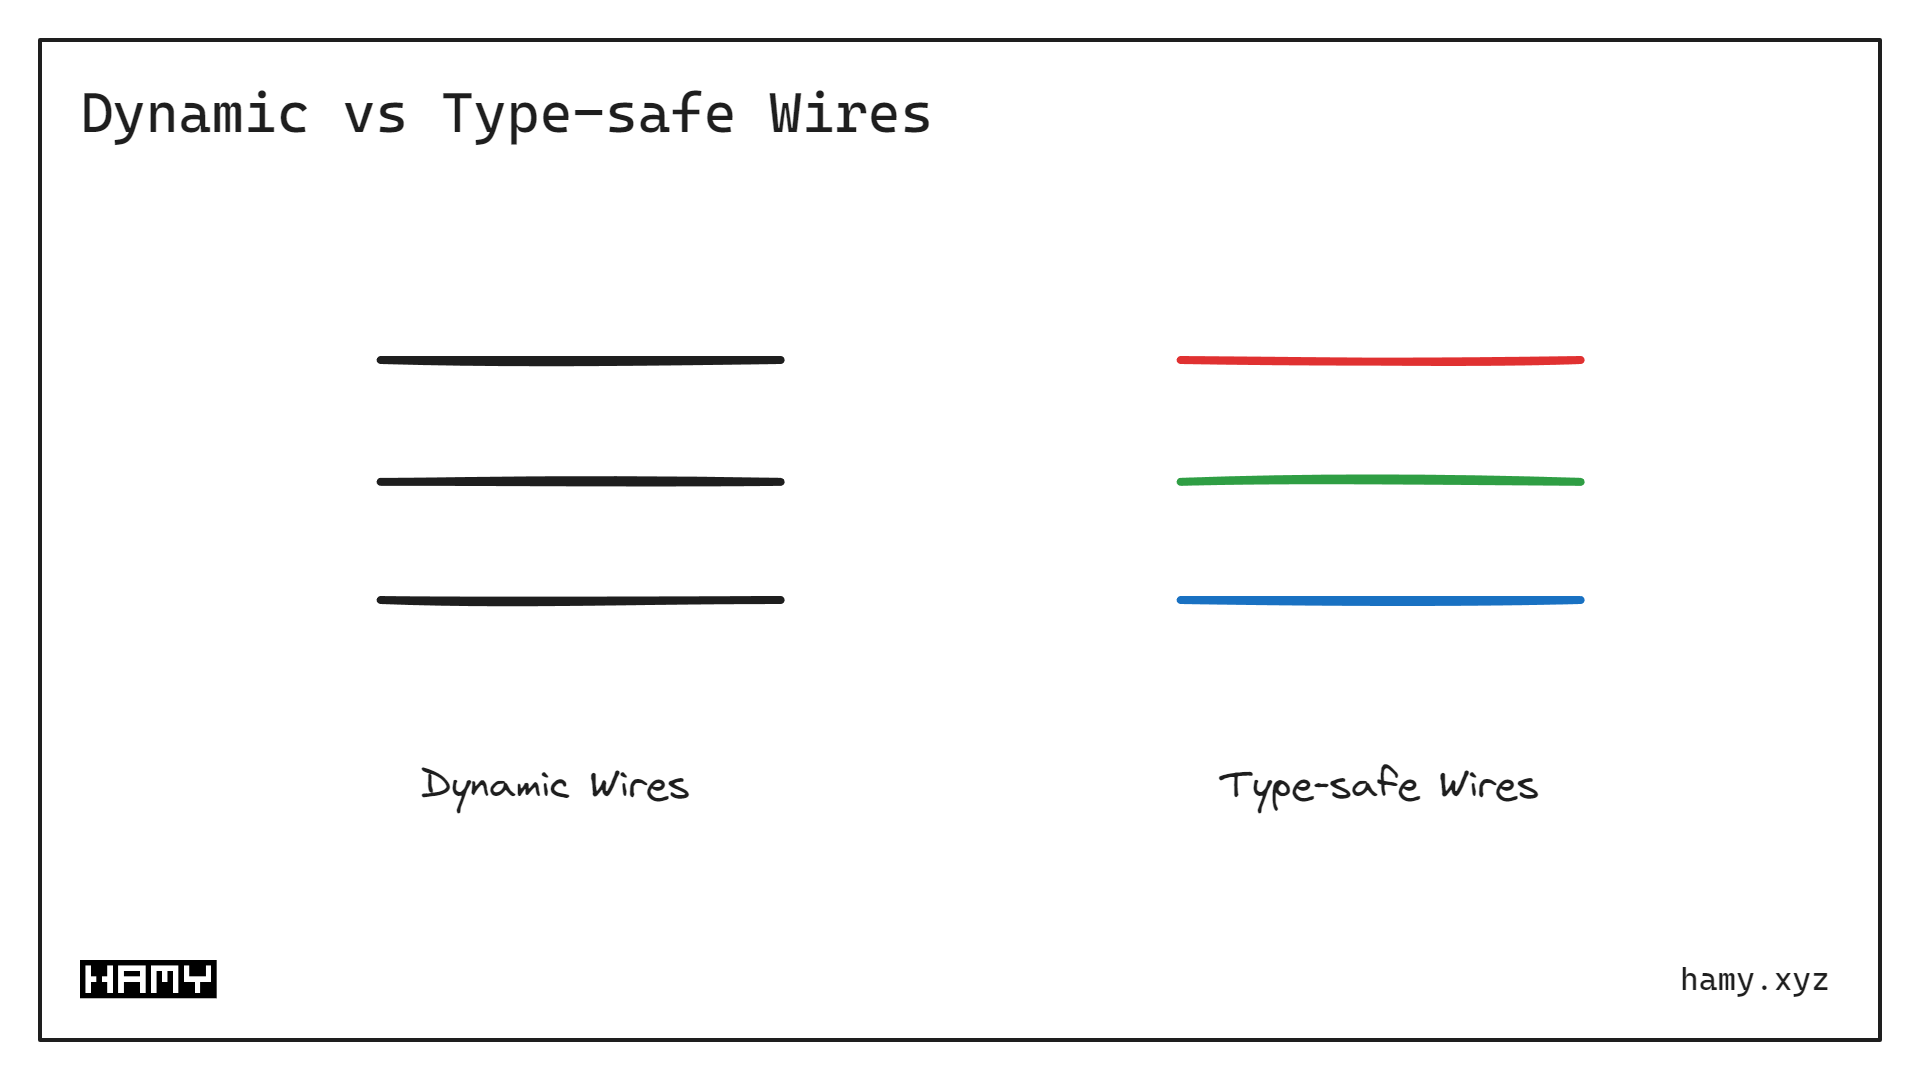 Type-safe vs Dynamic Wires